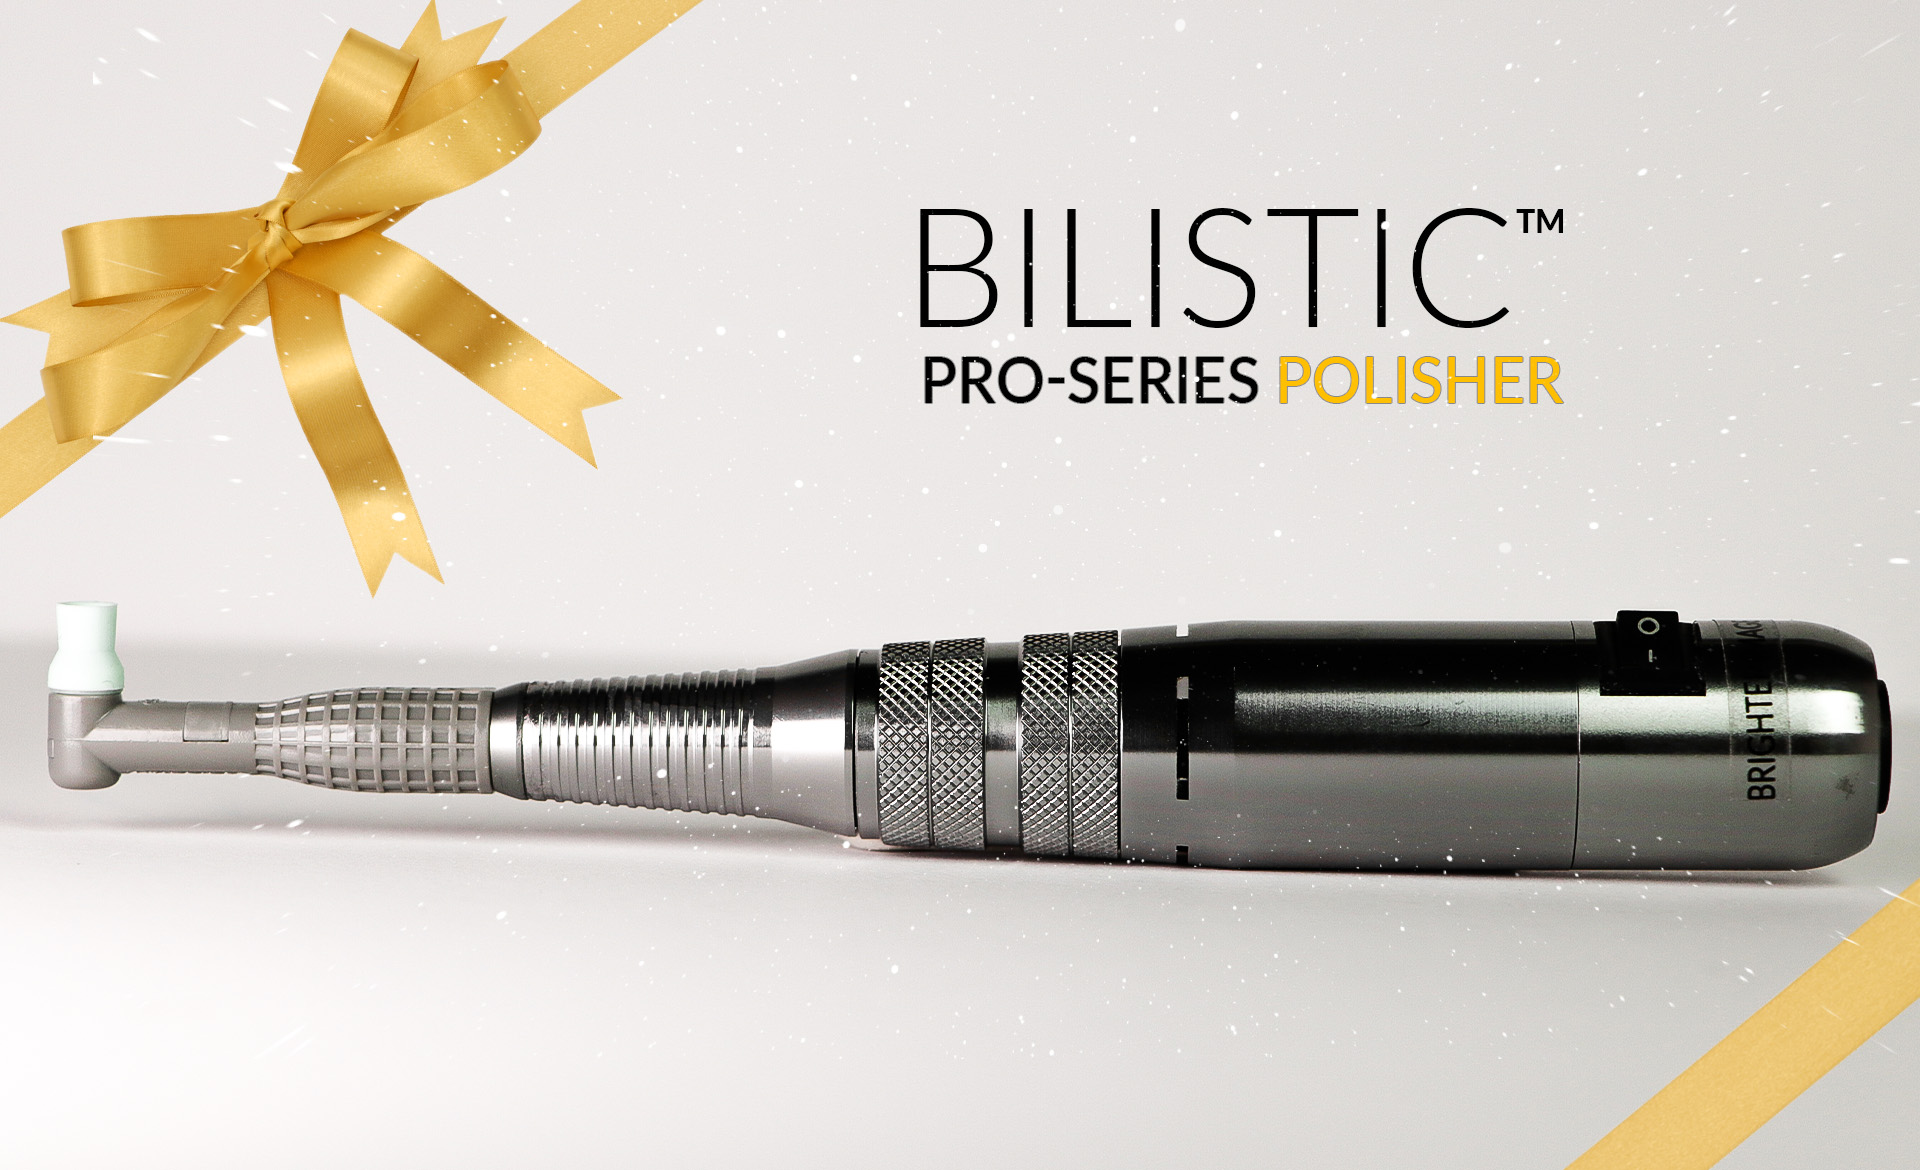 Bilistic Tooth Polisher - The Perfect Holiday Gift